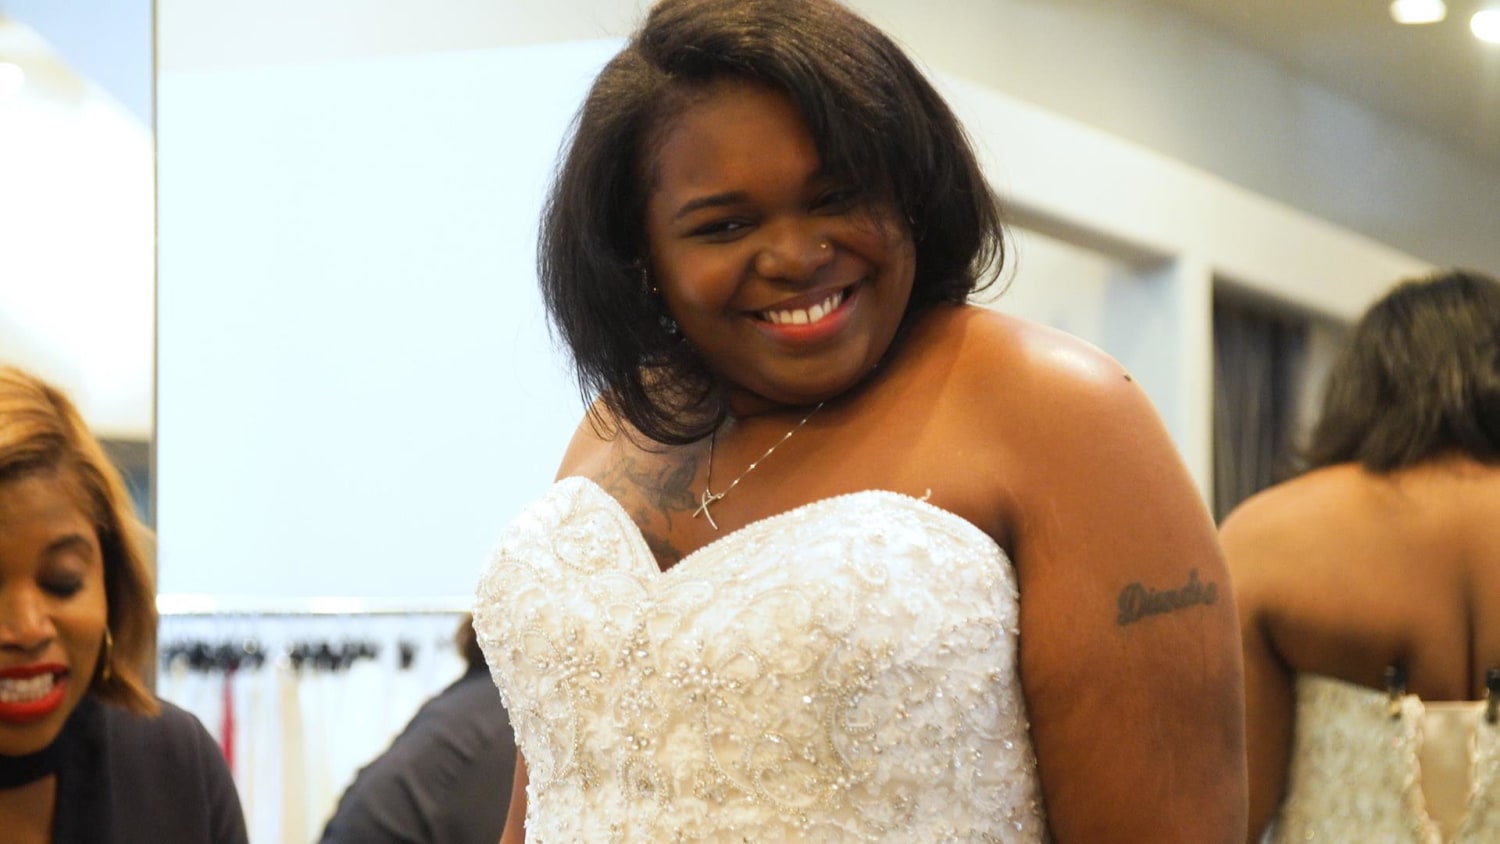 Calling all midsize/plus size/curvy brides, you're so worthy and